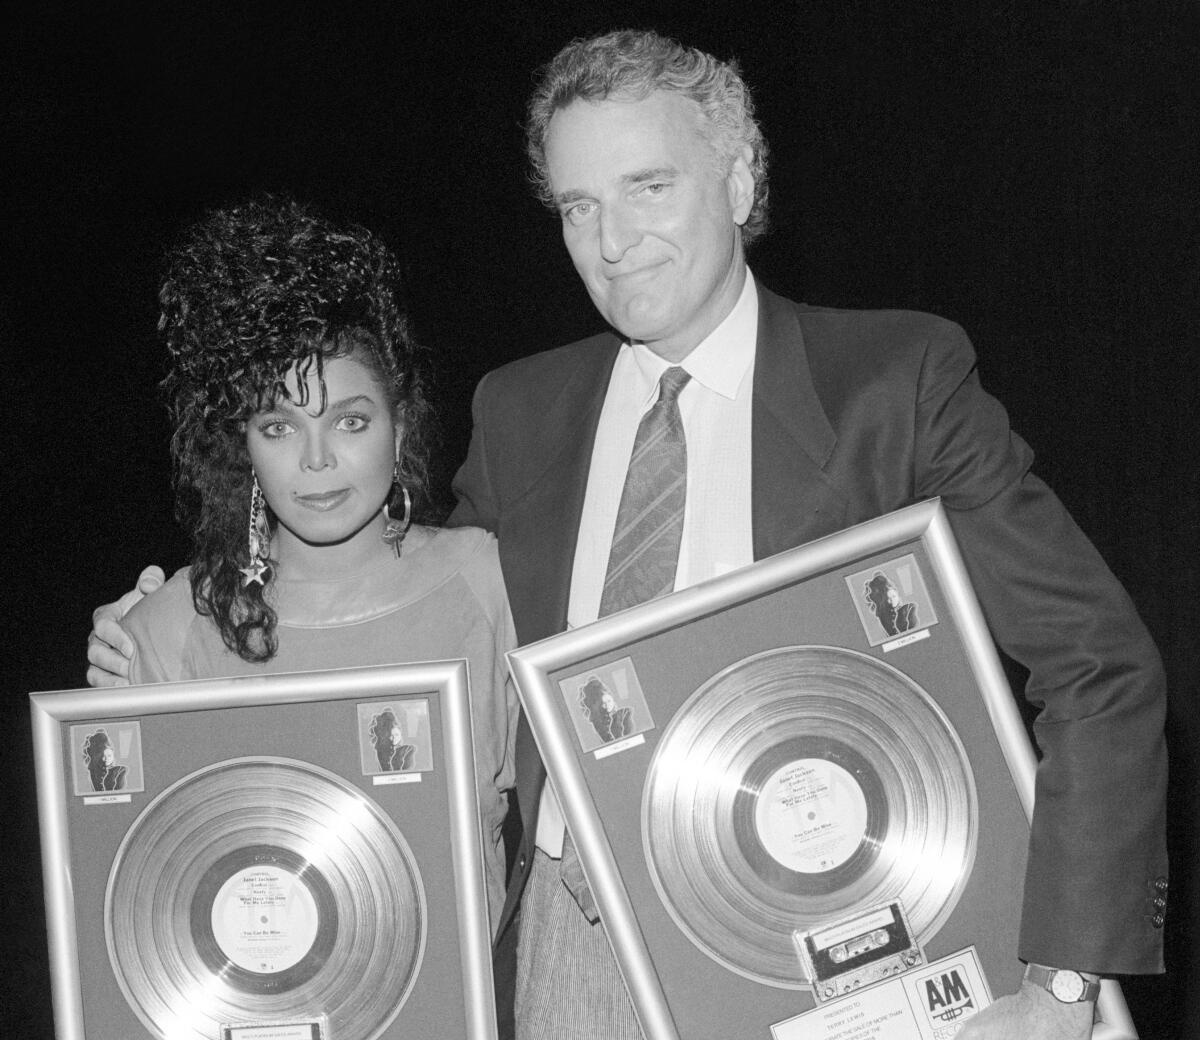 A man stands with his arm around a woman's shoulder. Both hold plaques for gold record album sales